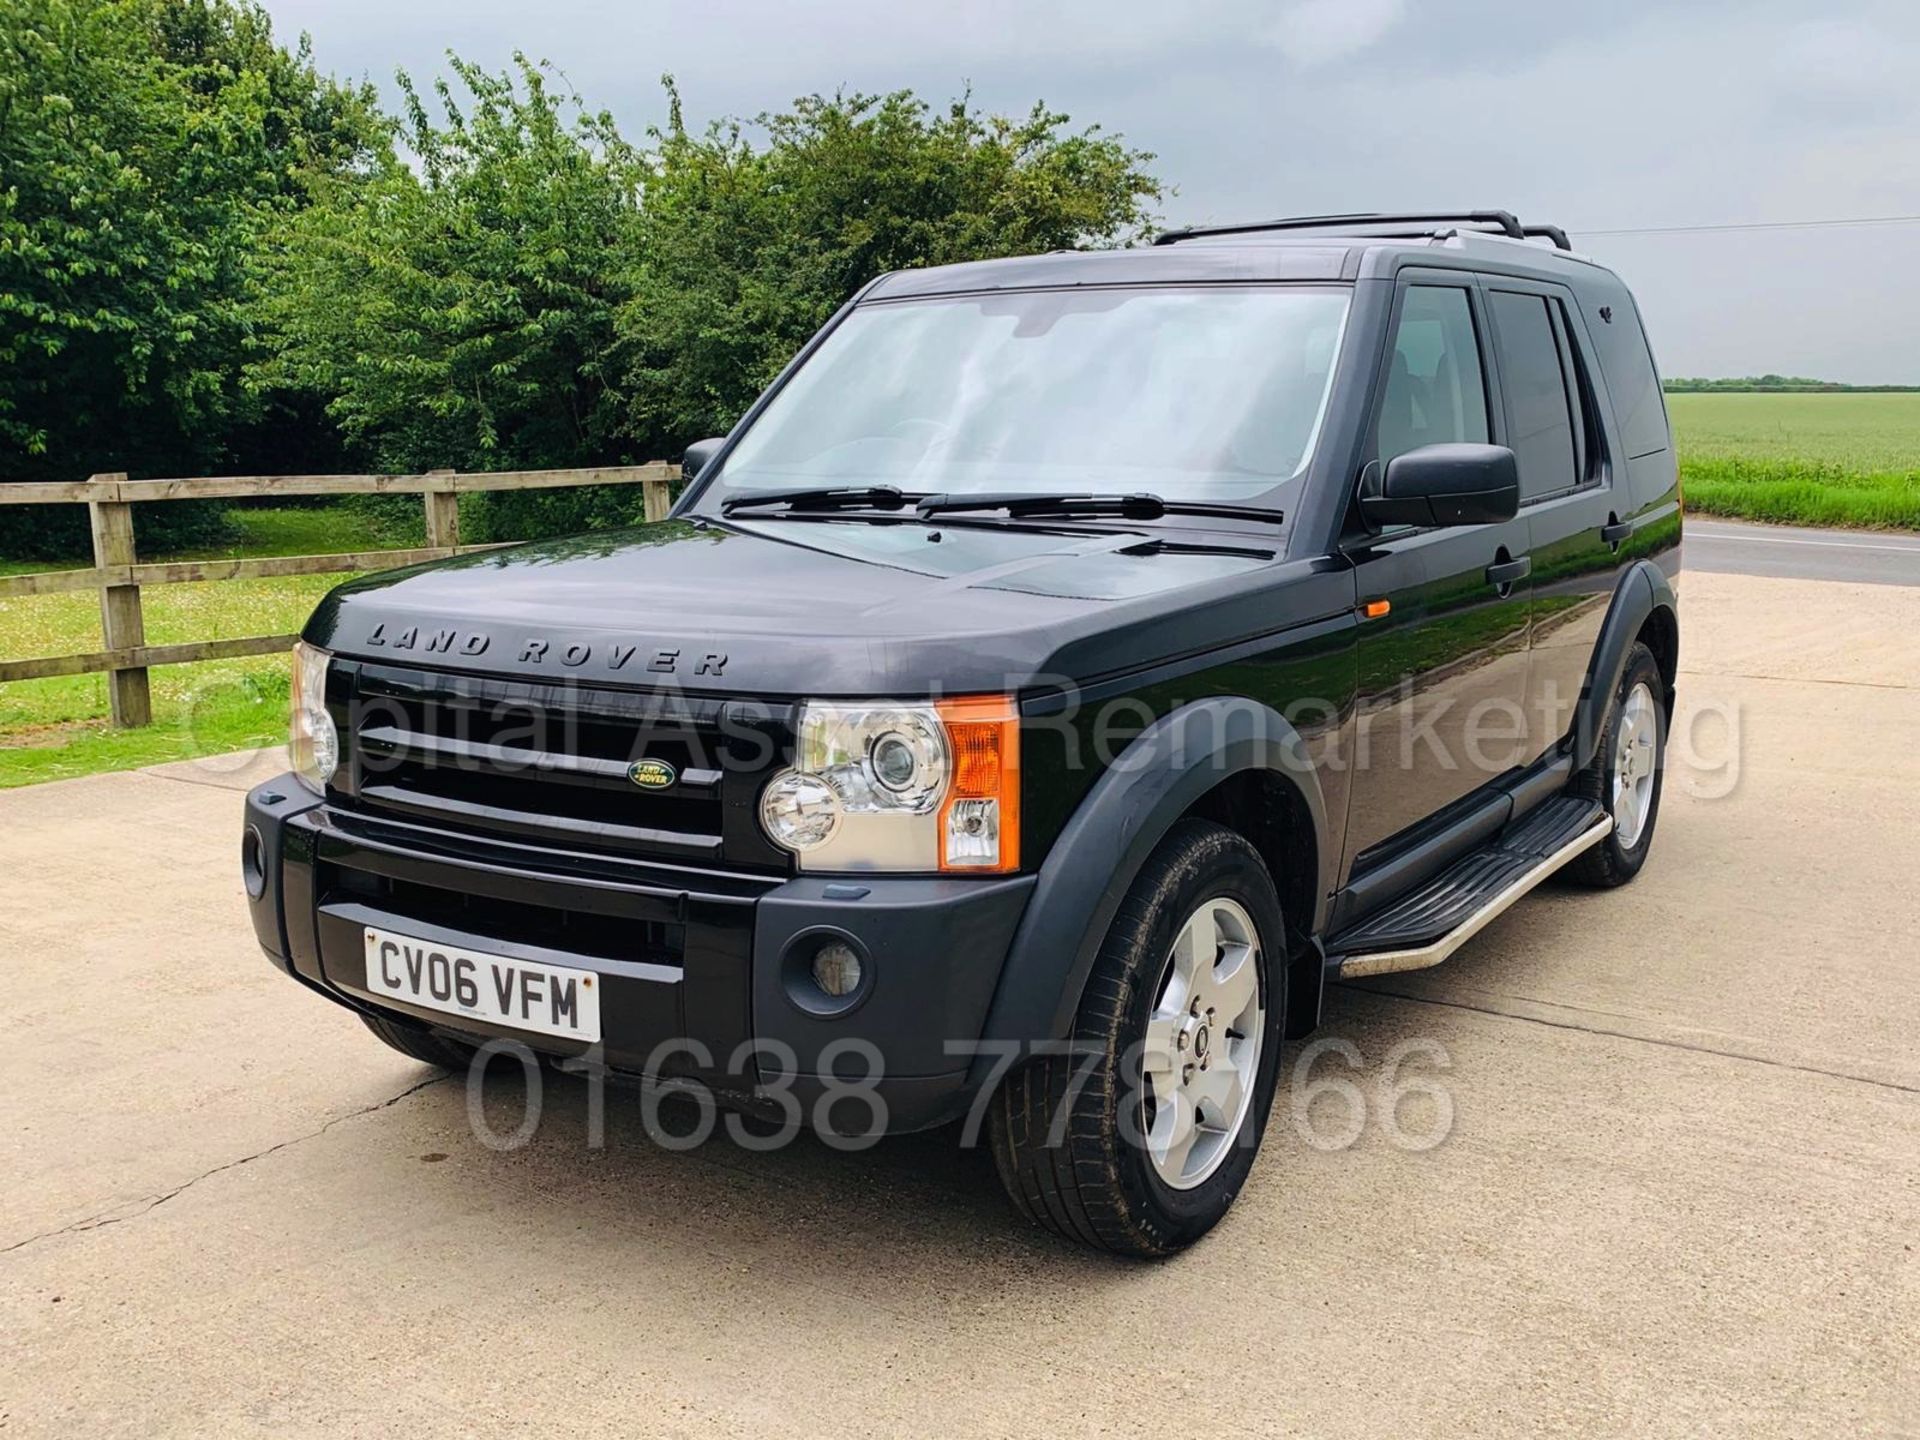 LAND ROVER DISCOVERY 3 *S EDITION* 7 SEATER SUV (2006 - NEW MODEL) '2.7 TDV6 - 190 BHP' *HUGE SPEC* - Image 3 of 36